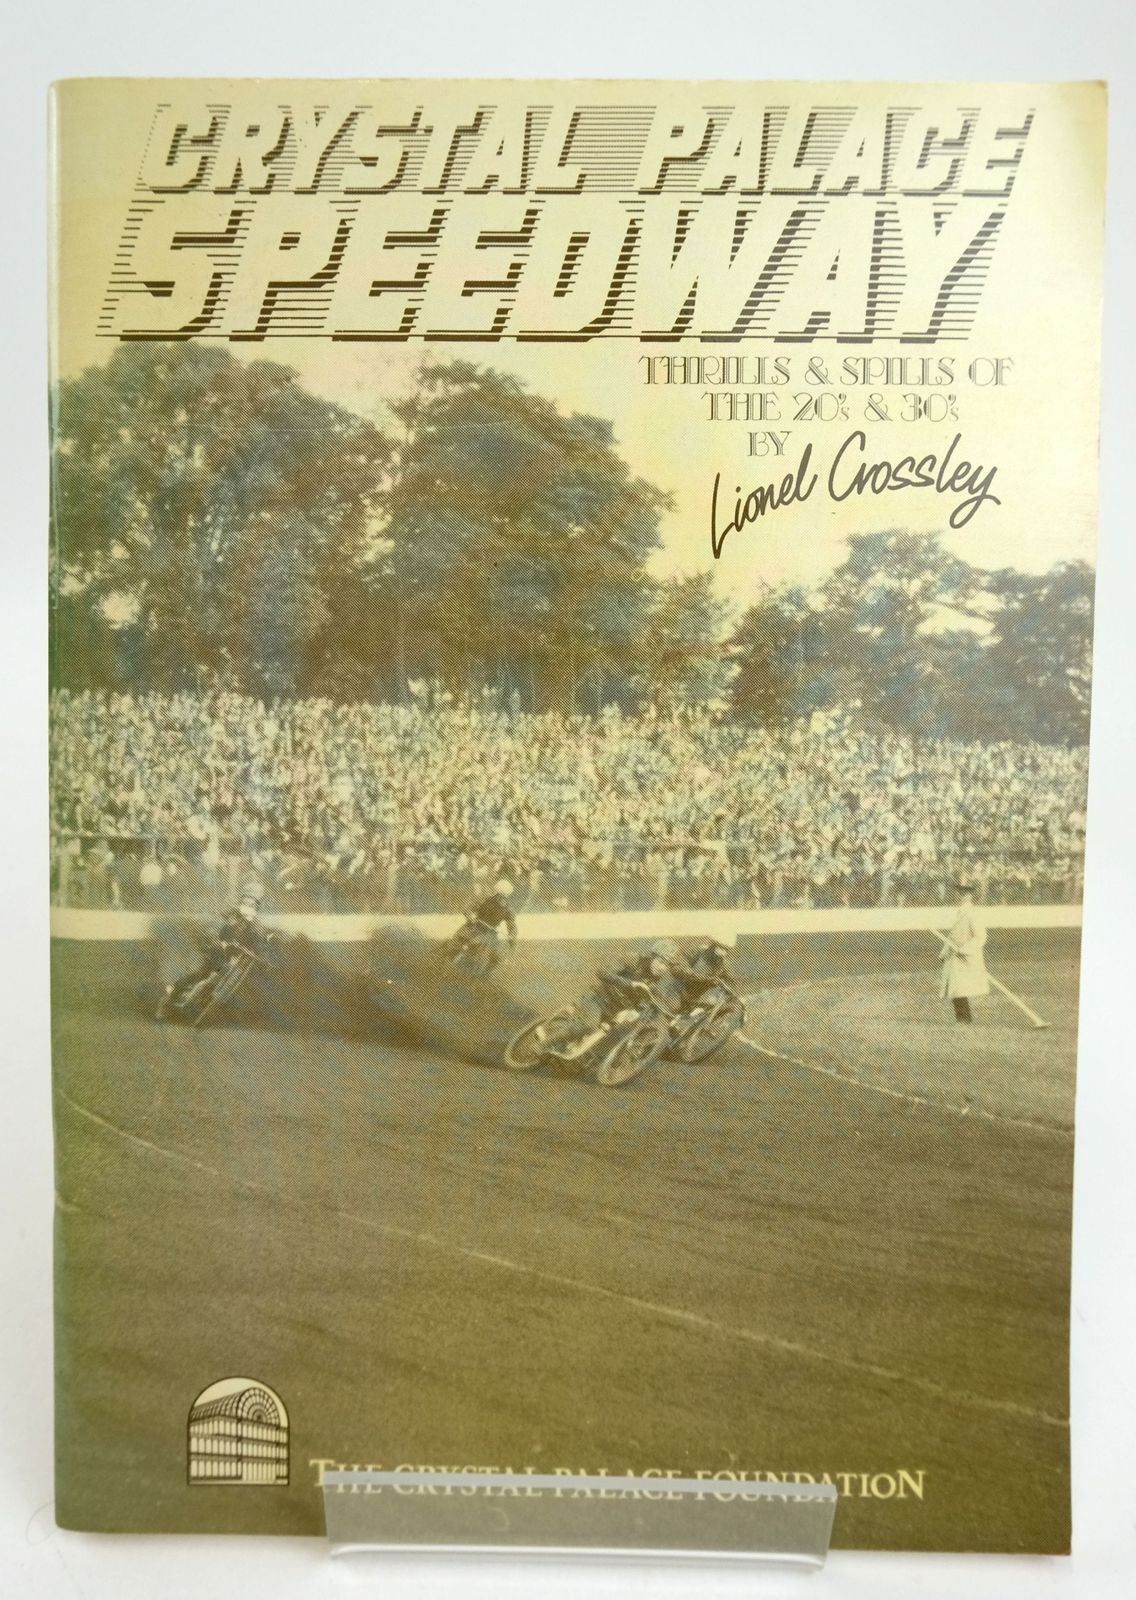 Photo of CRYSTAL PALACE SPEEDWAY: THE THRILLS AND SPILLS OF THE 20S AND 30S written by Crossley, Lionel published by Crystal Palace Foundation (STOCK CODE: 1819597)  for sale by Stella & Rose's Books